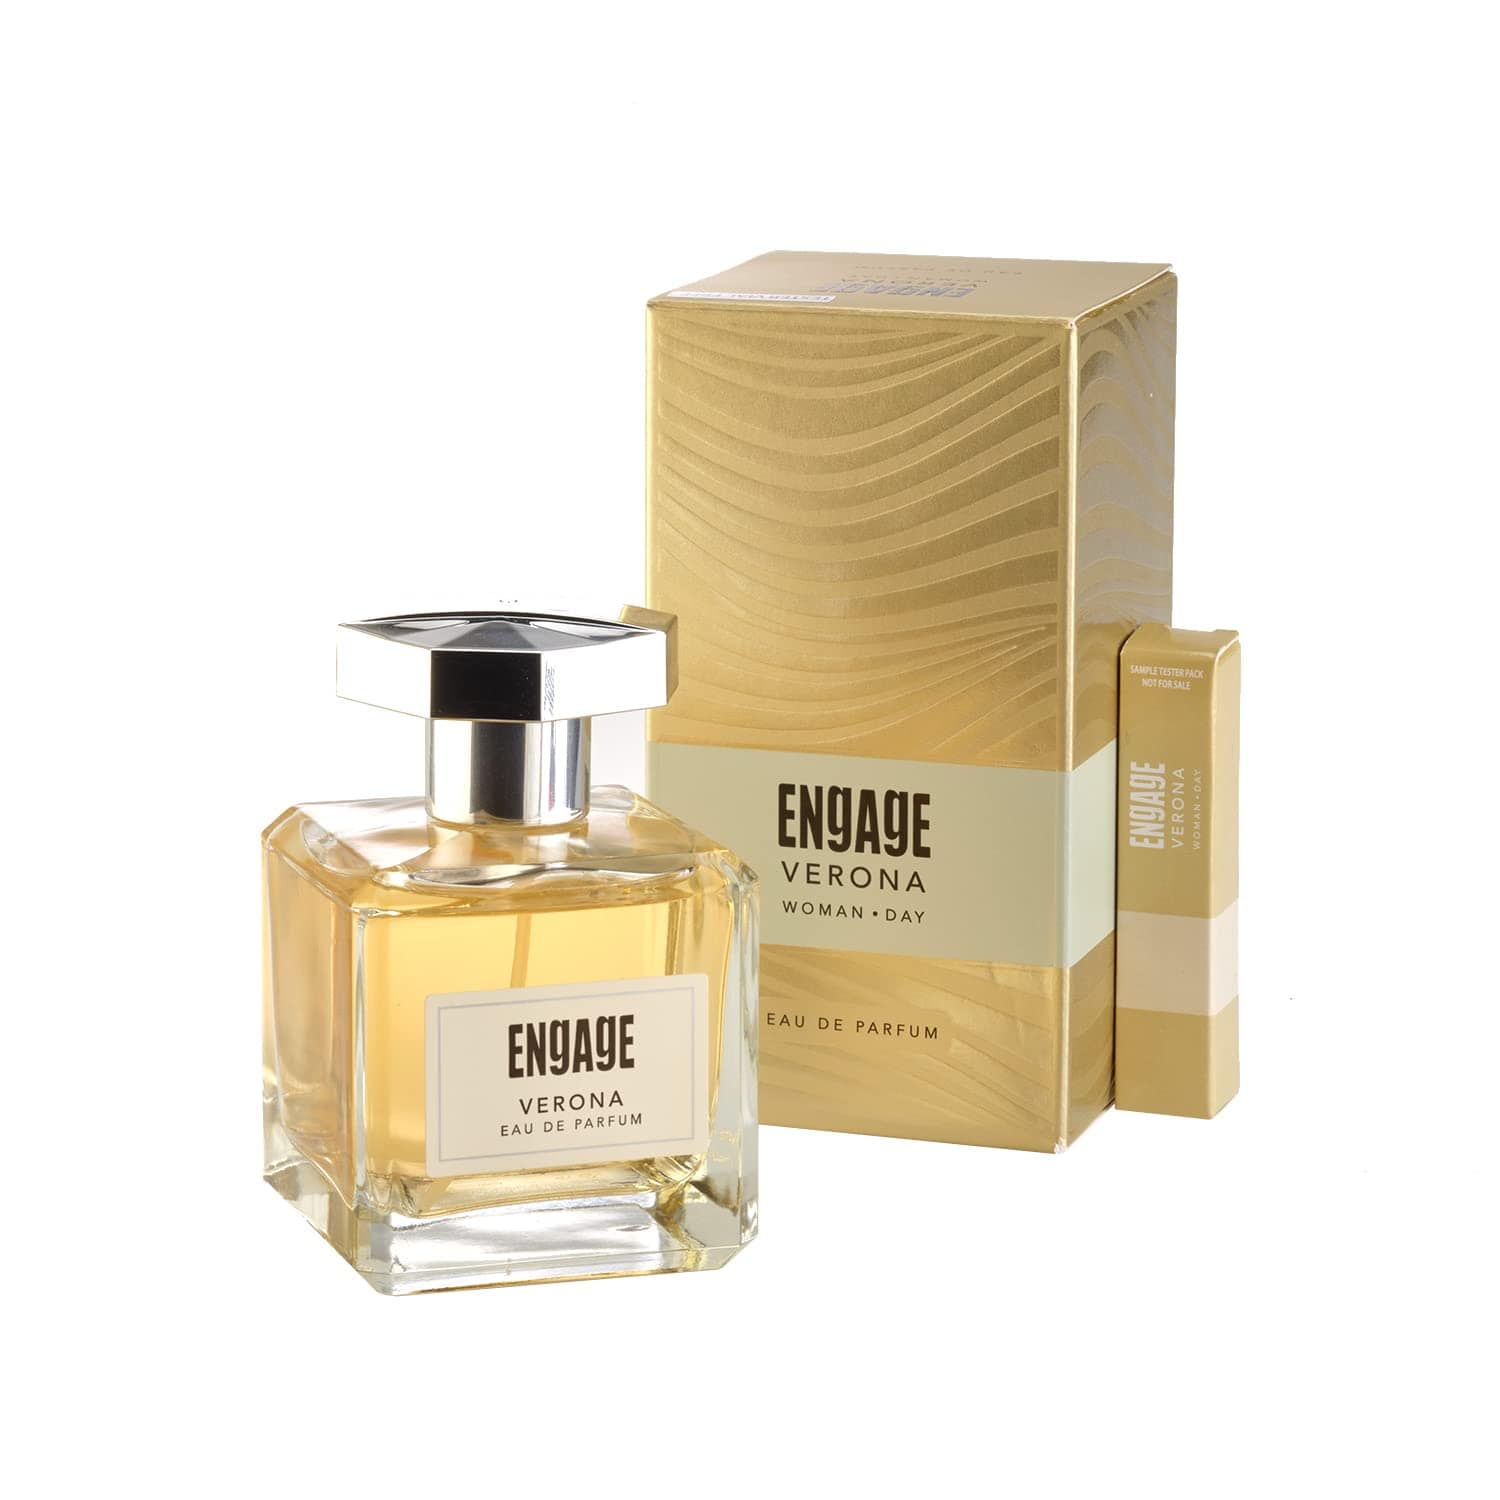 Engage Verona Perfume for Women, Long Lasting, Citrus and Fruity, for Everyday Use, Gift for Women, Free Tester with pack, 100ml - YuvaFlowers